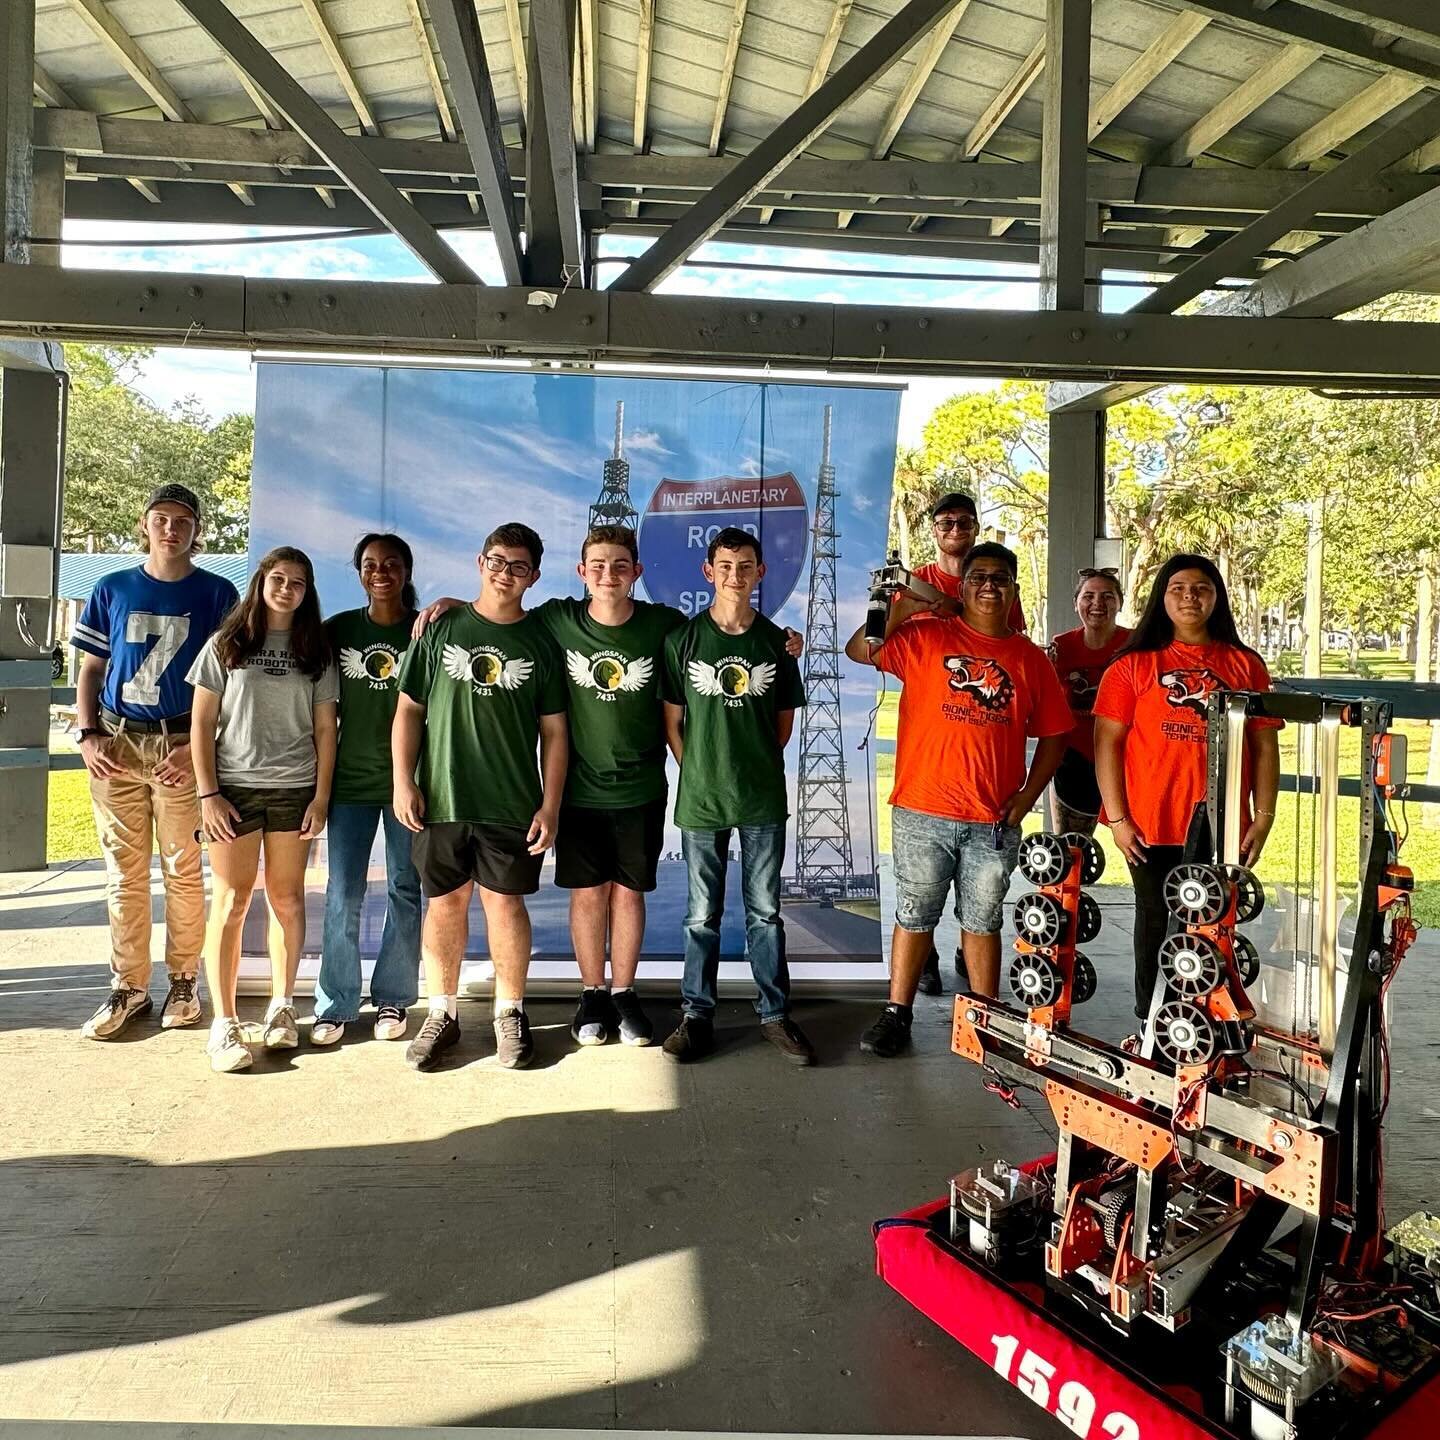 This past weekend we were invited to the Space Coast Games to assist @BlueOrigin in hosting this year and to demonstrate the robot! It was a blast to watch the 13 different companies from the space coast gather and compete against each other in a var